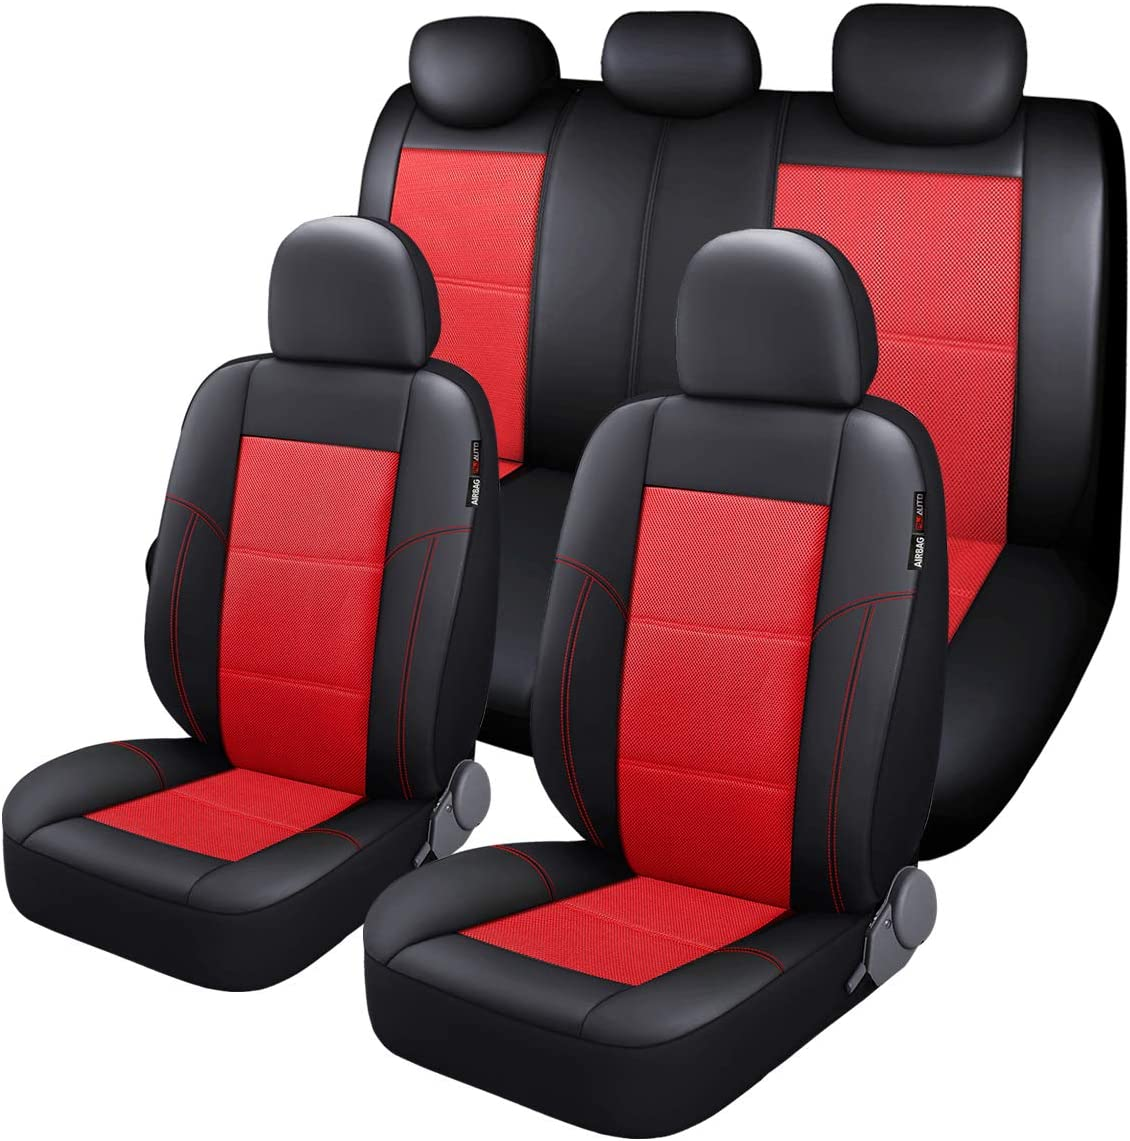 Leather and Mesh Car Seat Cover Full Set in 9Pcs Universal Fit for Cars Trucks Vans & Suvs Airbag Compatible (Red)